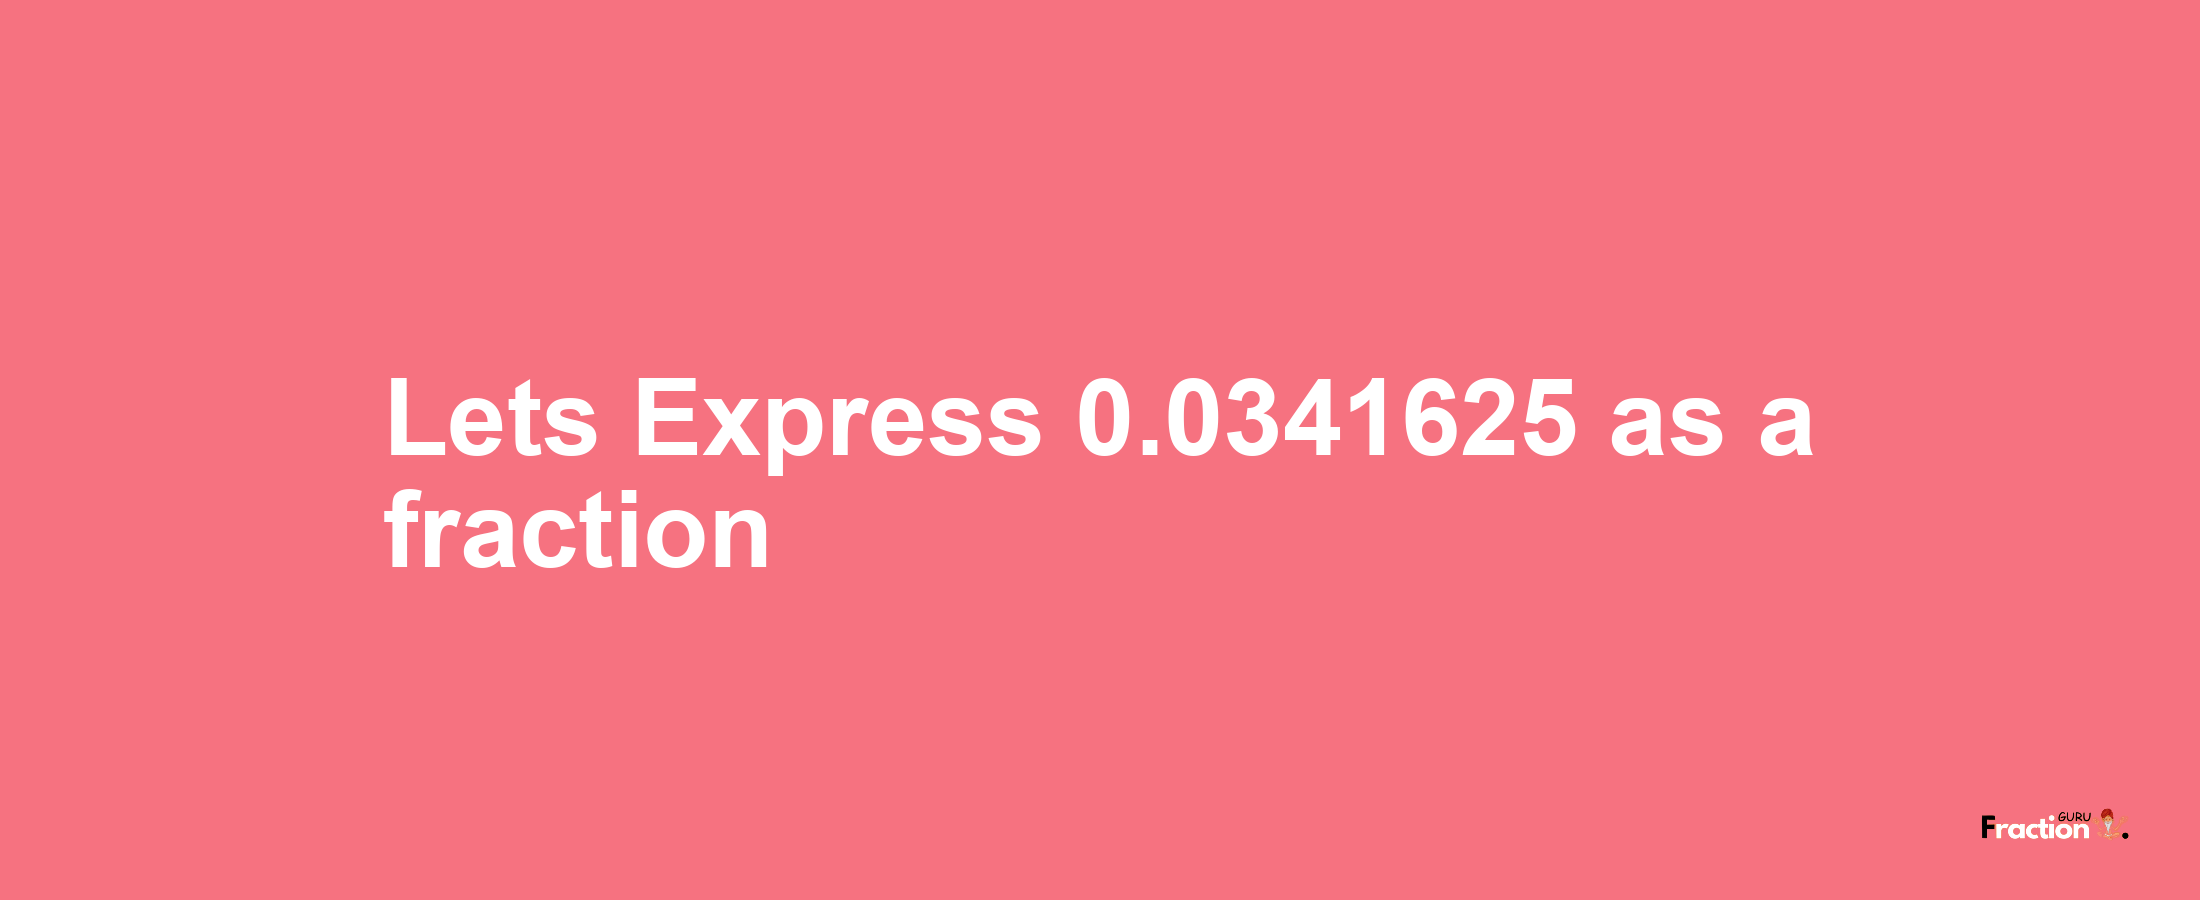 Lets Express 0.0341625 as afraction